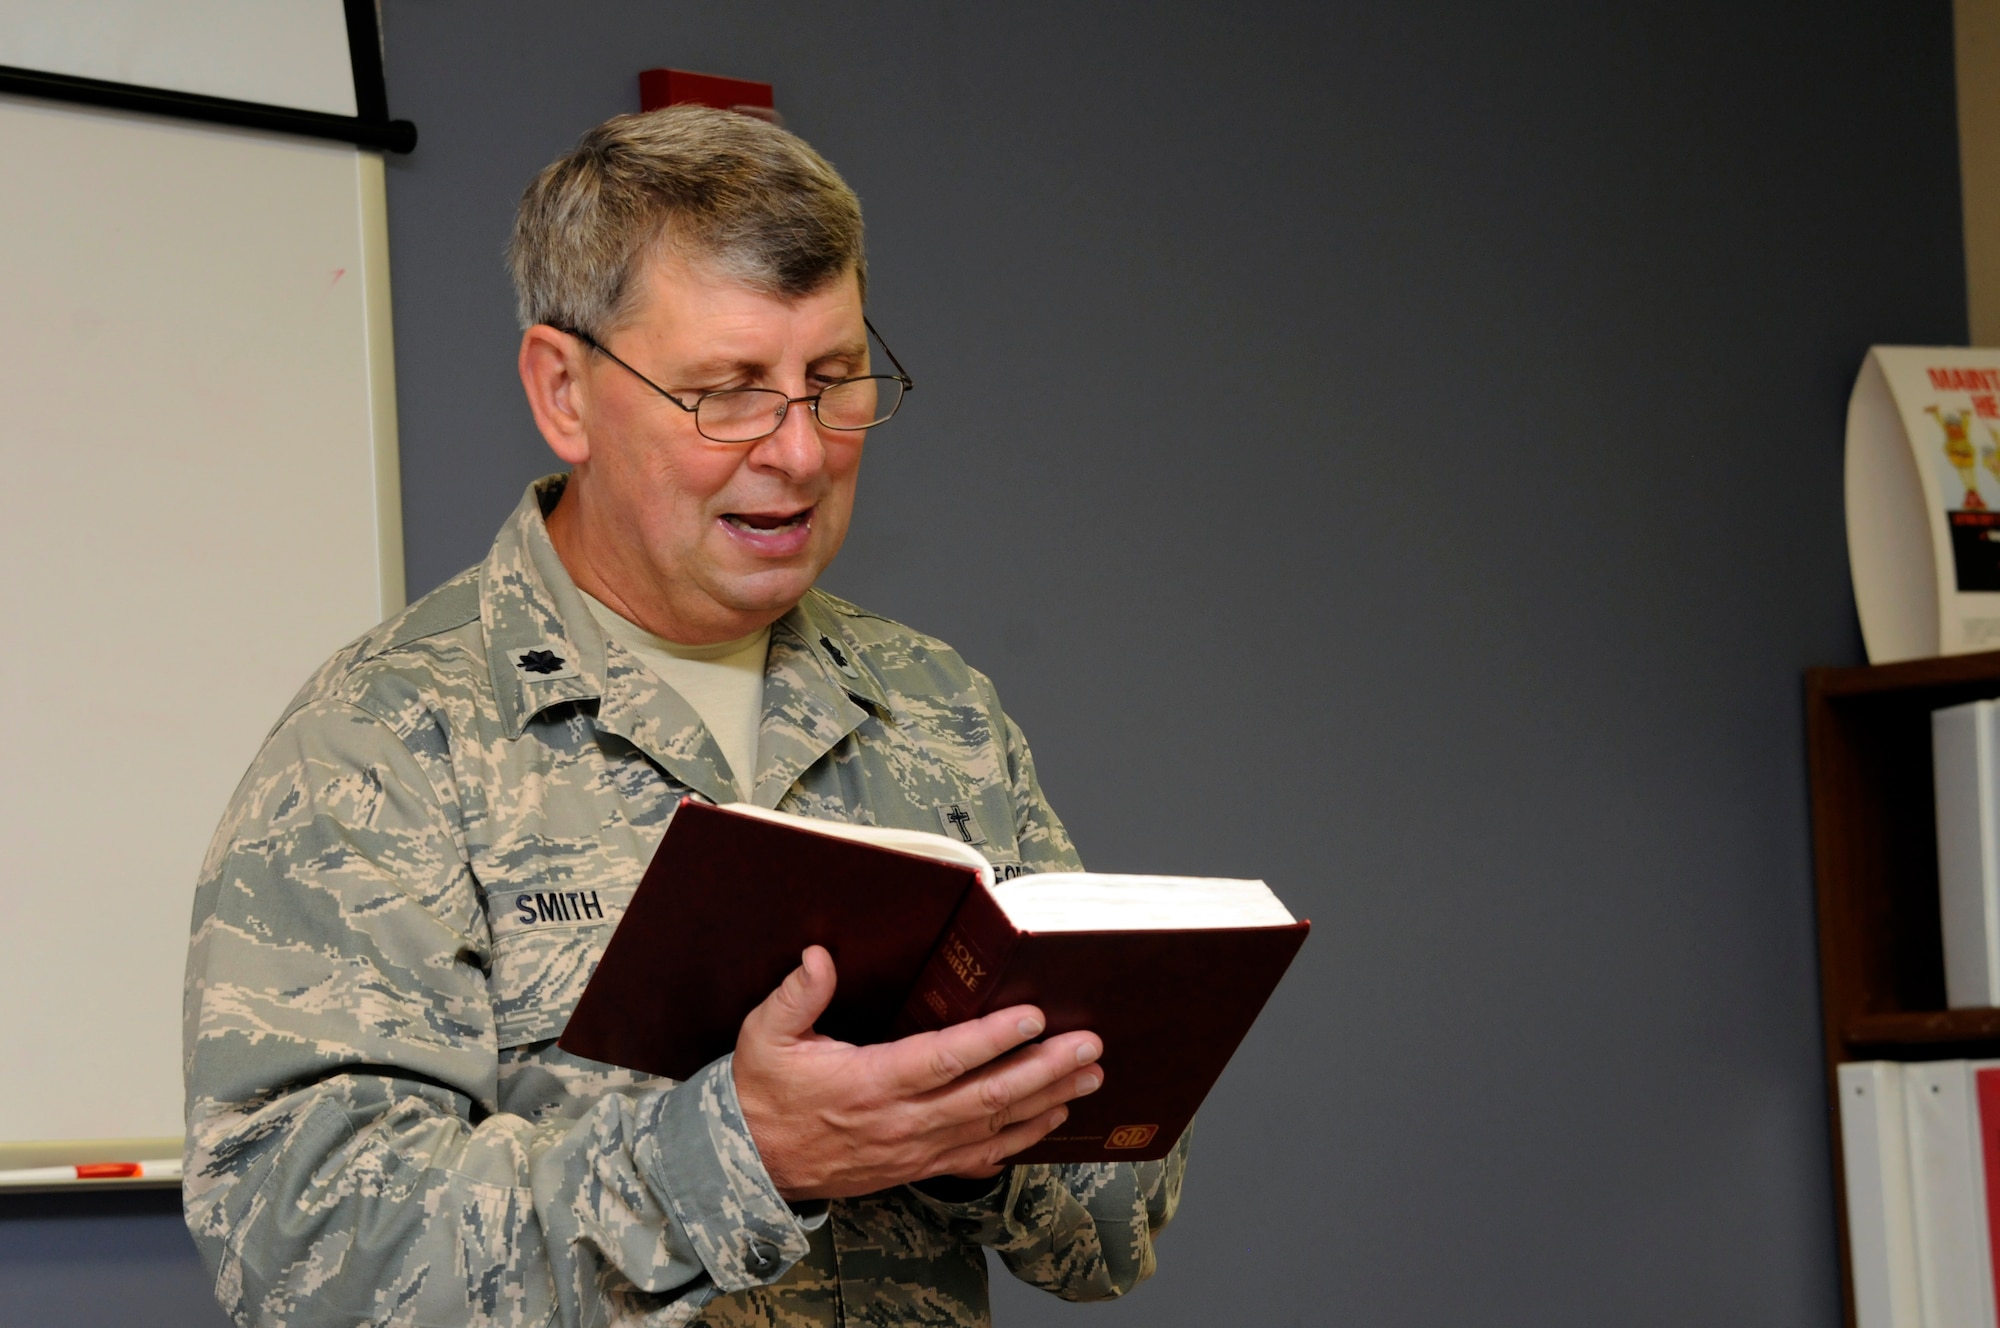 Lt. Col. Thomas Smith, wing chaplain, reads from the Bible during a brown bag lunch bunch Bible study held June 26 at the 188th Fighter Wing. These weekly Bible studies led by Smith bring together unit members for a time to share fellowship, study and eat lunch together. (U.S. Air National Guard photo by 1st Lt. Holli Snyder/188th Fighter Wing Public Affairs)